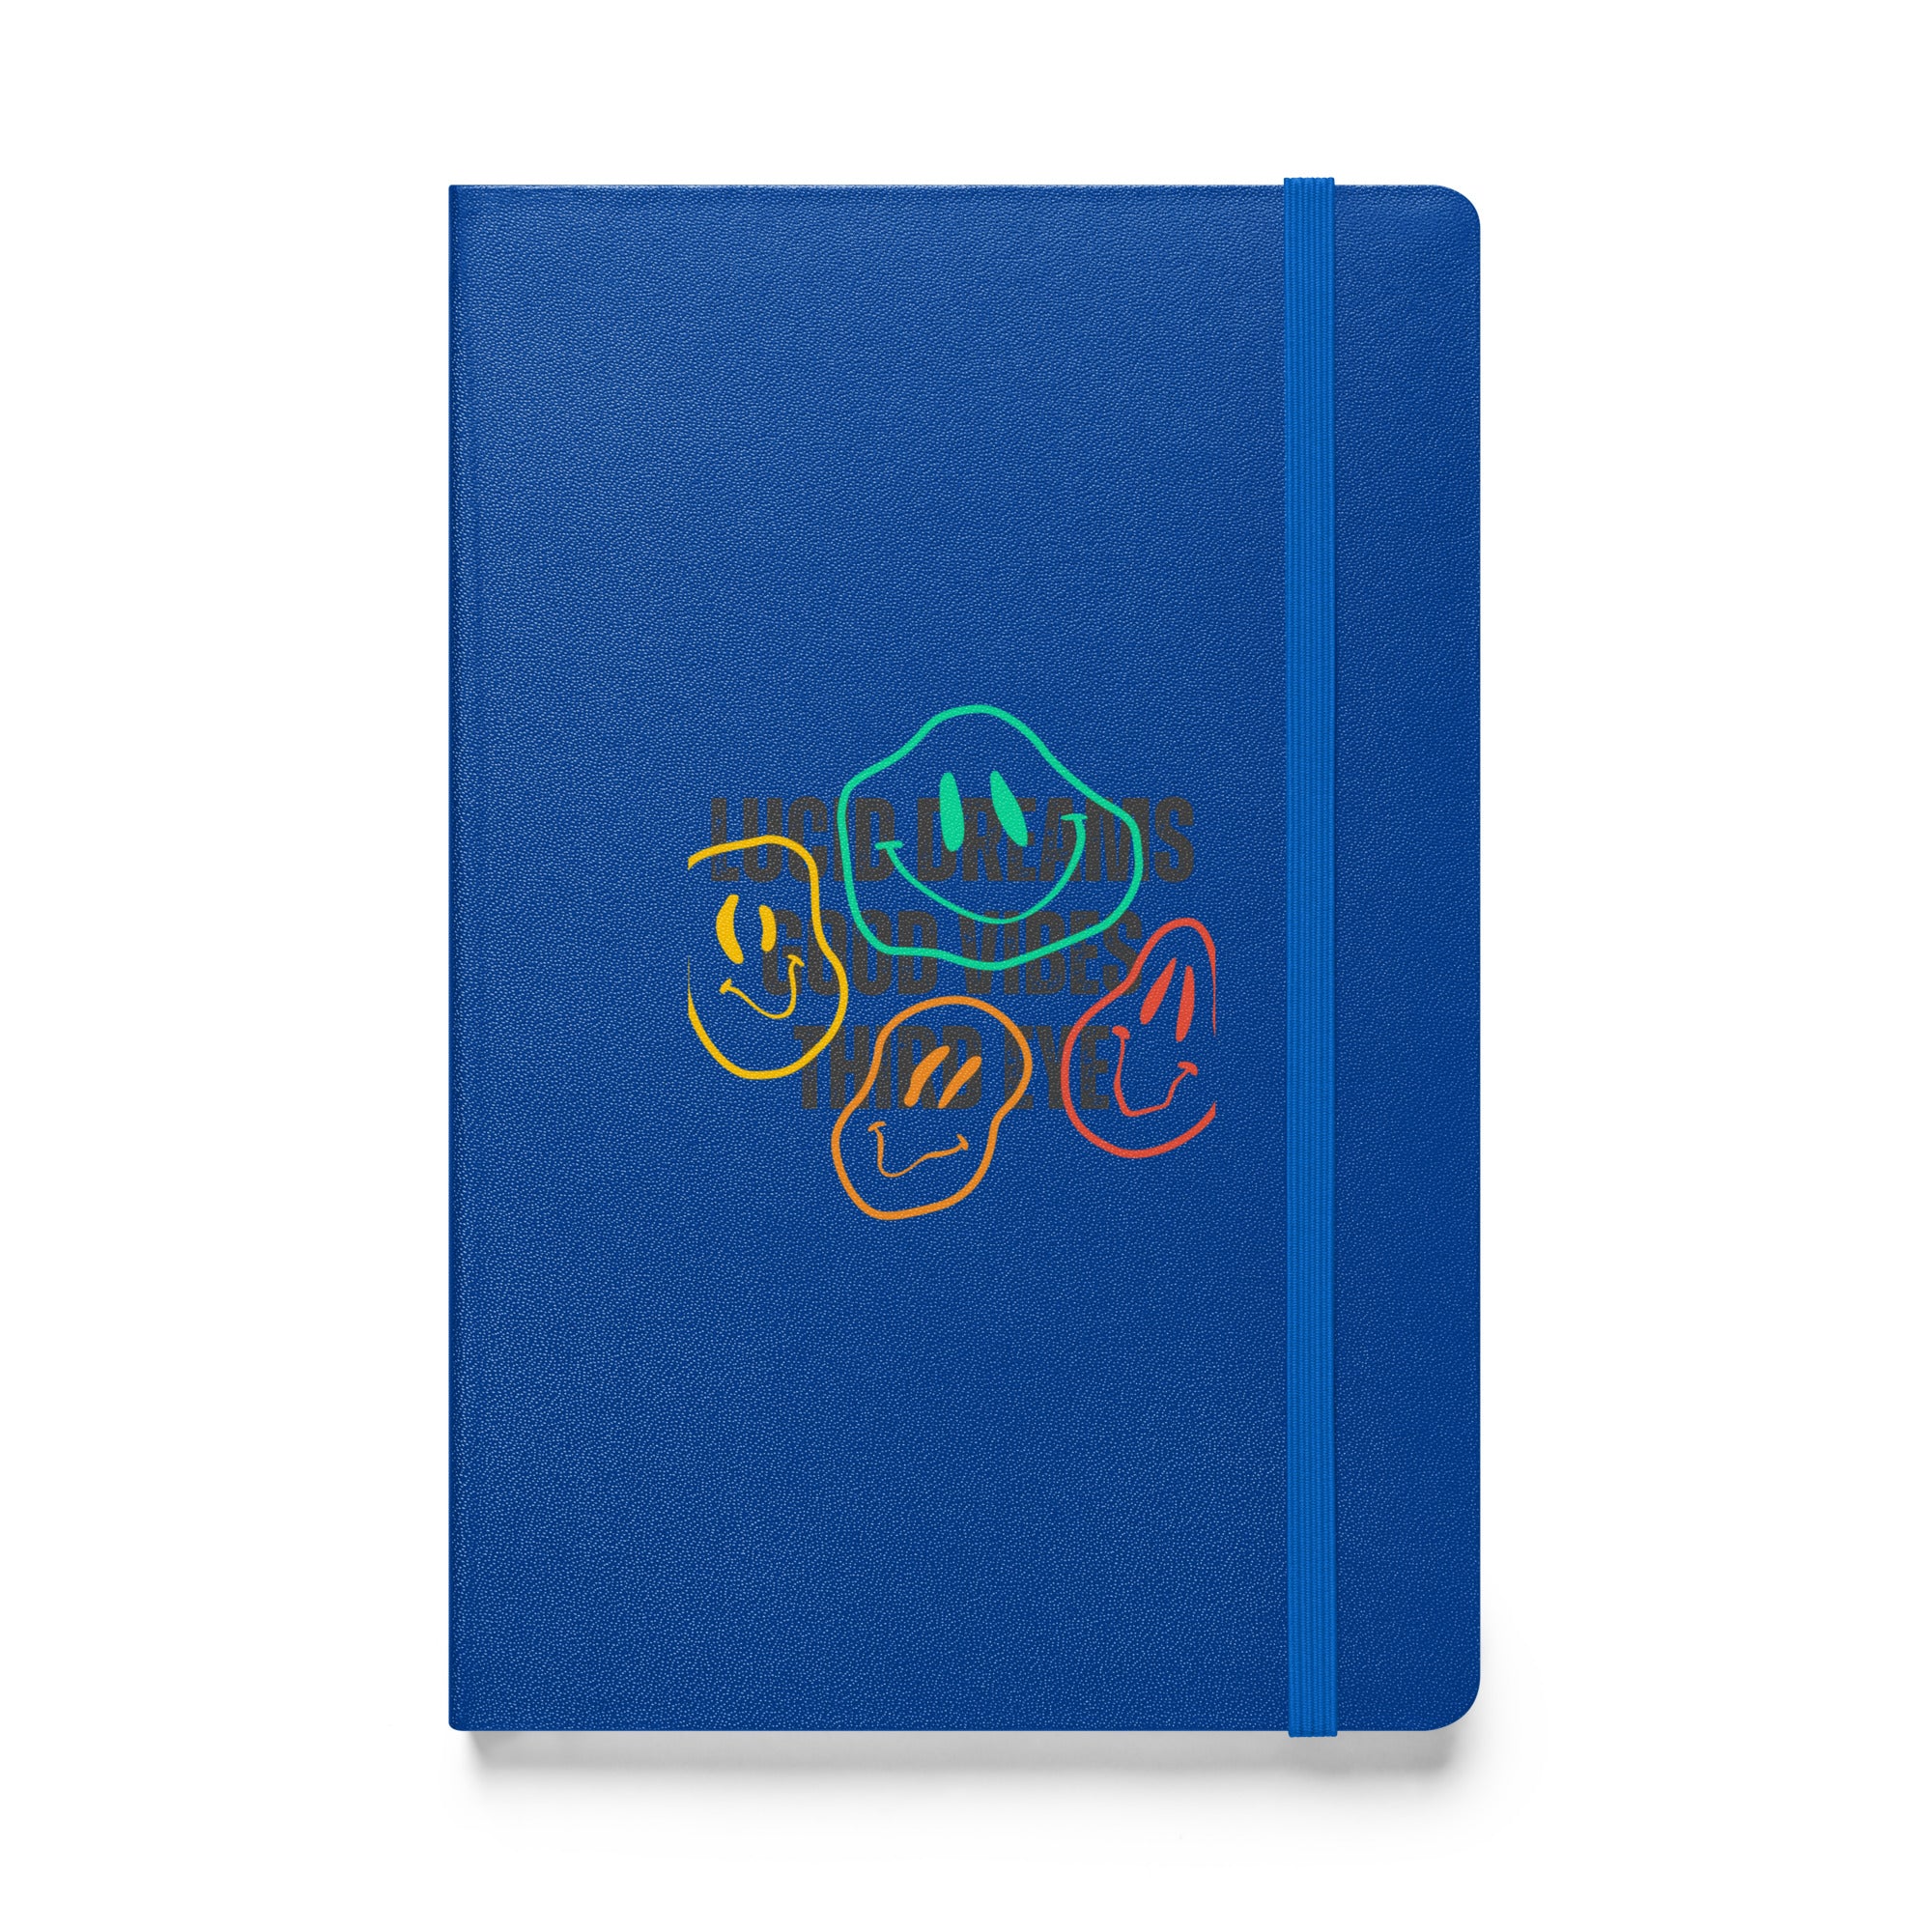 Lucid Dreams Hardcover bound notebook